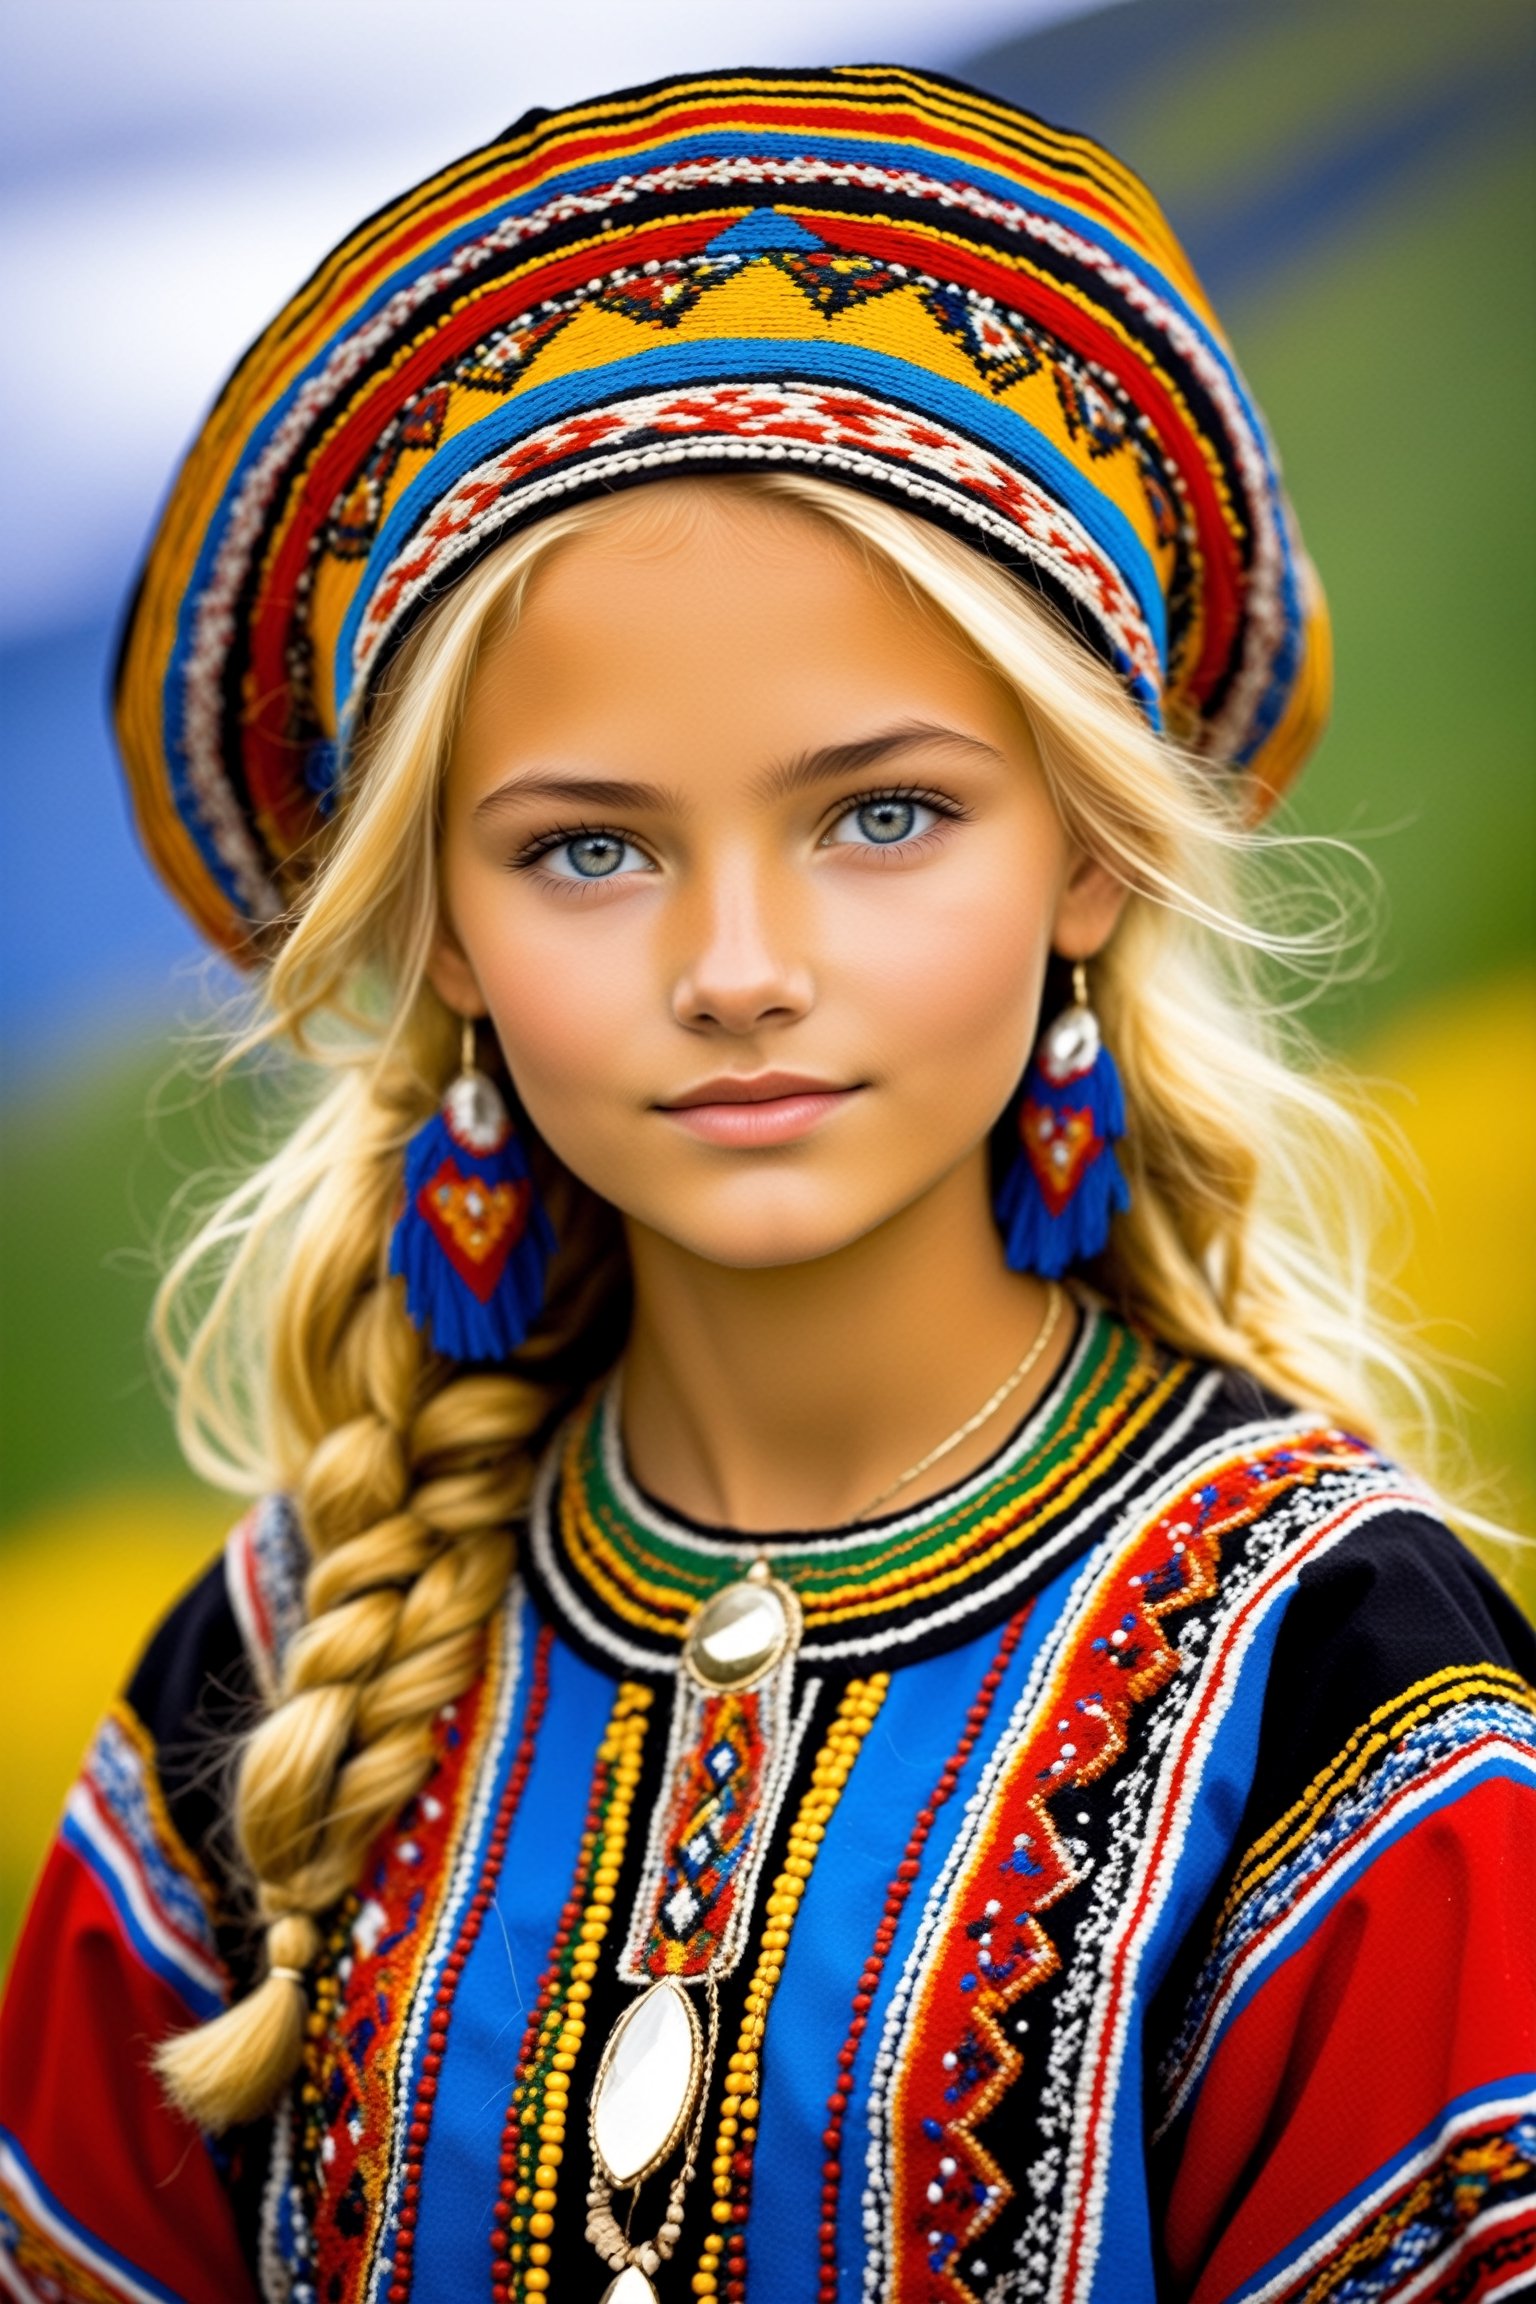  drop-dead gorgeous beautiful young girl,17 years old,highly clear face,very cute, Beautiful blonde hair,bright look,smooth curly hair,
adorned in traditional Sami clothing  kofte, representing the indigenous people of northern Europe,Her kofte intricately embroidered in vibrant colors, is complemented by traditional accessories such as a beaded belt and intricately woven headgear,,ol1v1adunne,photo_b00ster